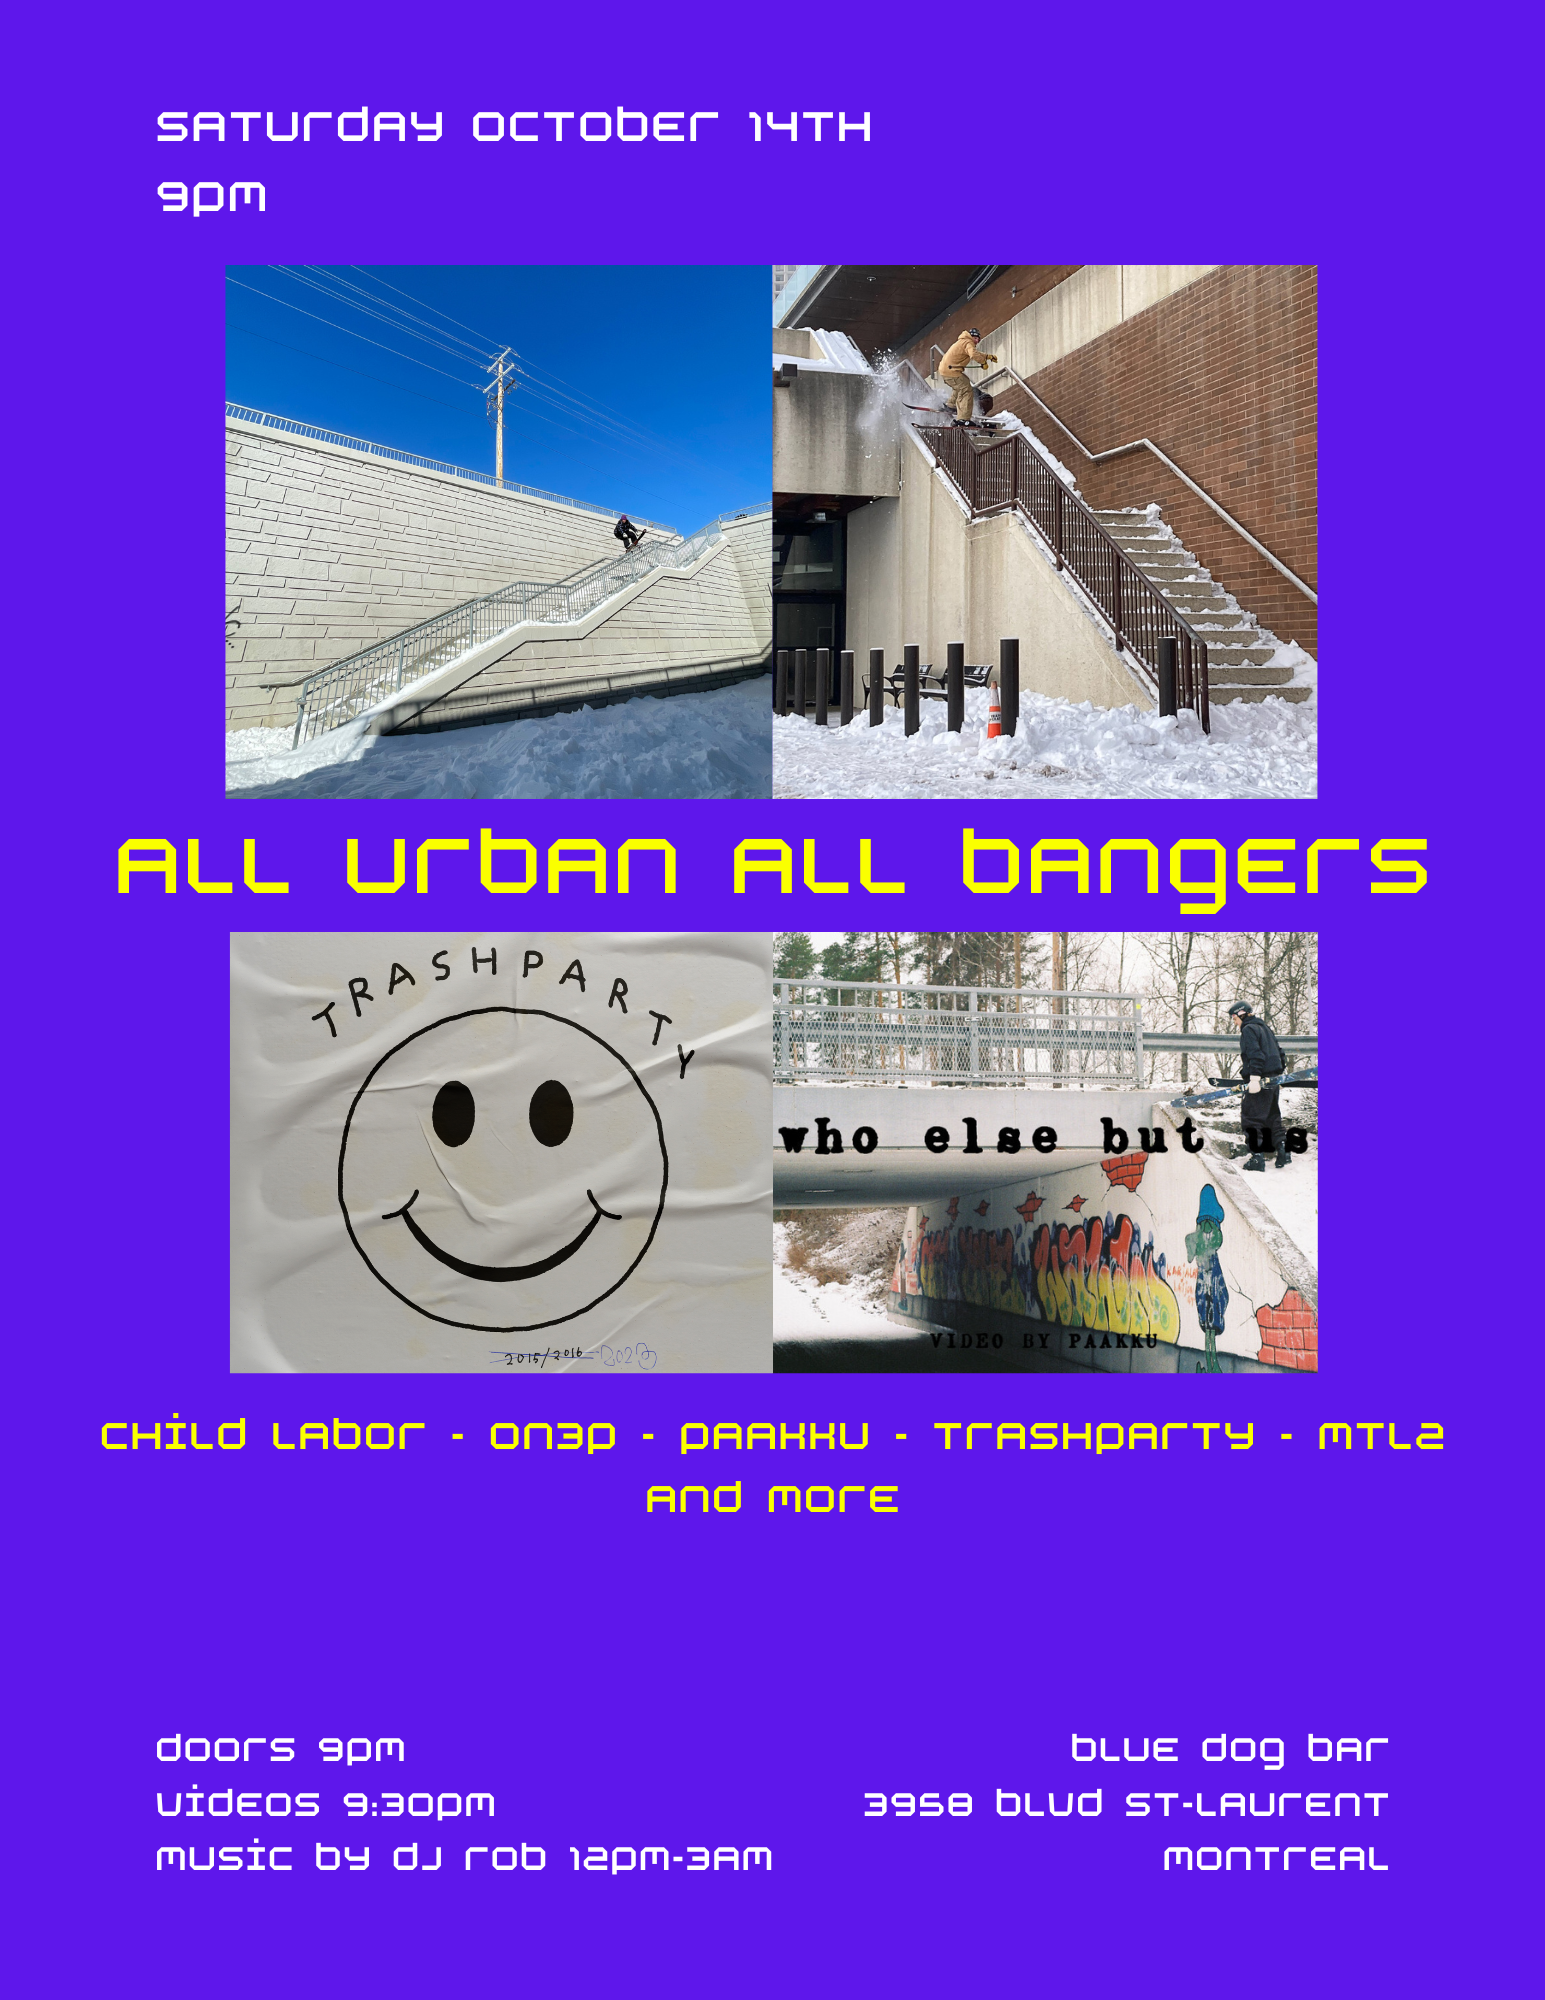 ALL URBAN ALL BANGERS - Saturday October 14th in Montreal